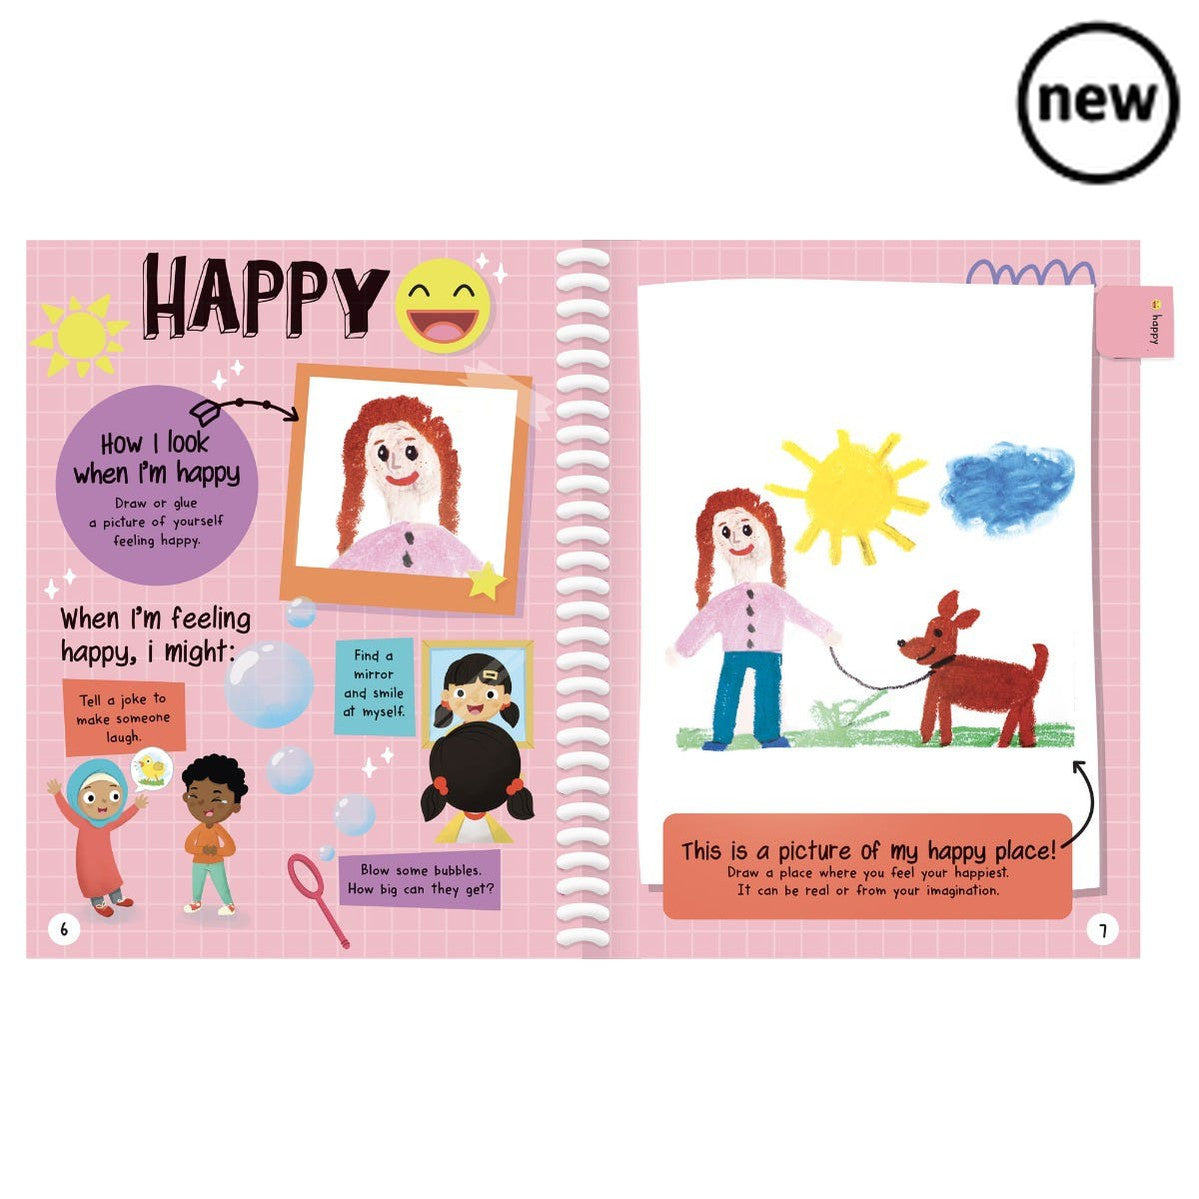 Express My Feelings Journal, This colourful social emotional learning (SEL) feelings journal for kids helps children aged 5 and up take a closer look at 20 amazing feelings through hands-on activities. From excited to disappointed, angry to accepted, children use this emotions journal to learn how to identify and manage their feelings, even the tricky ones! The 66-page spiral-bound book features colourful, engaging illustrations children can relate to, and prompts to do written journaling activities. The co